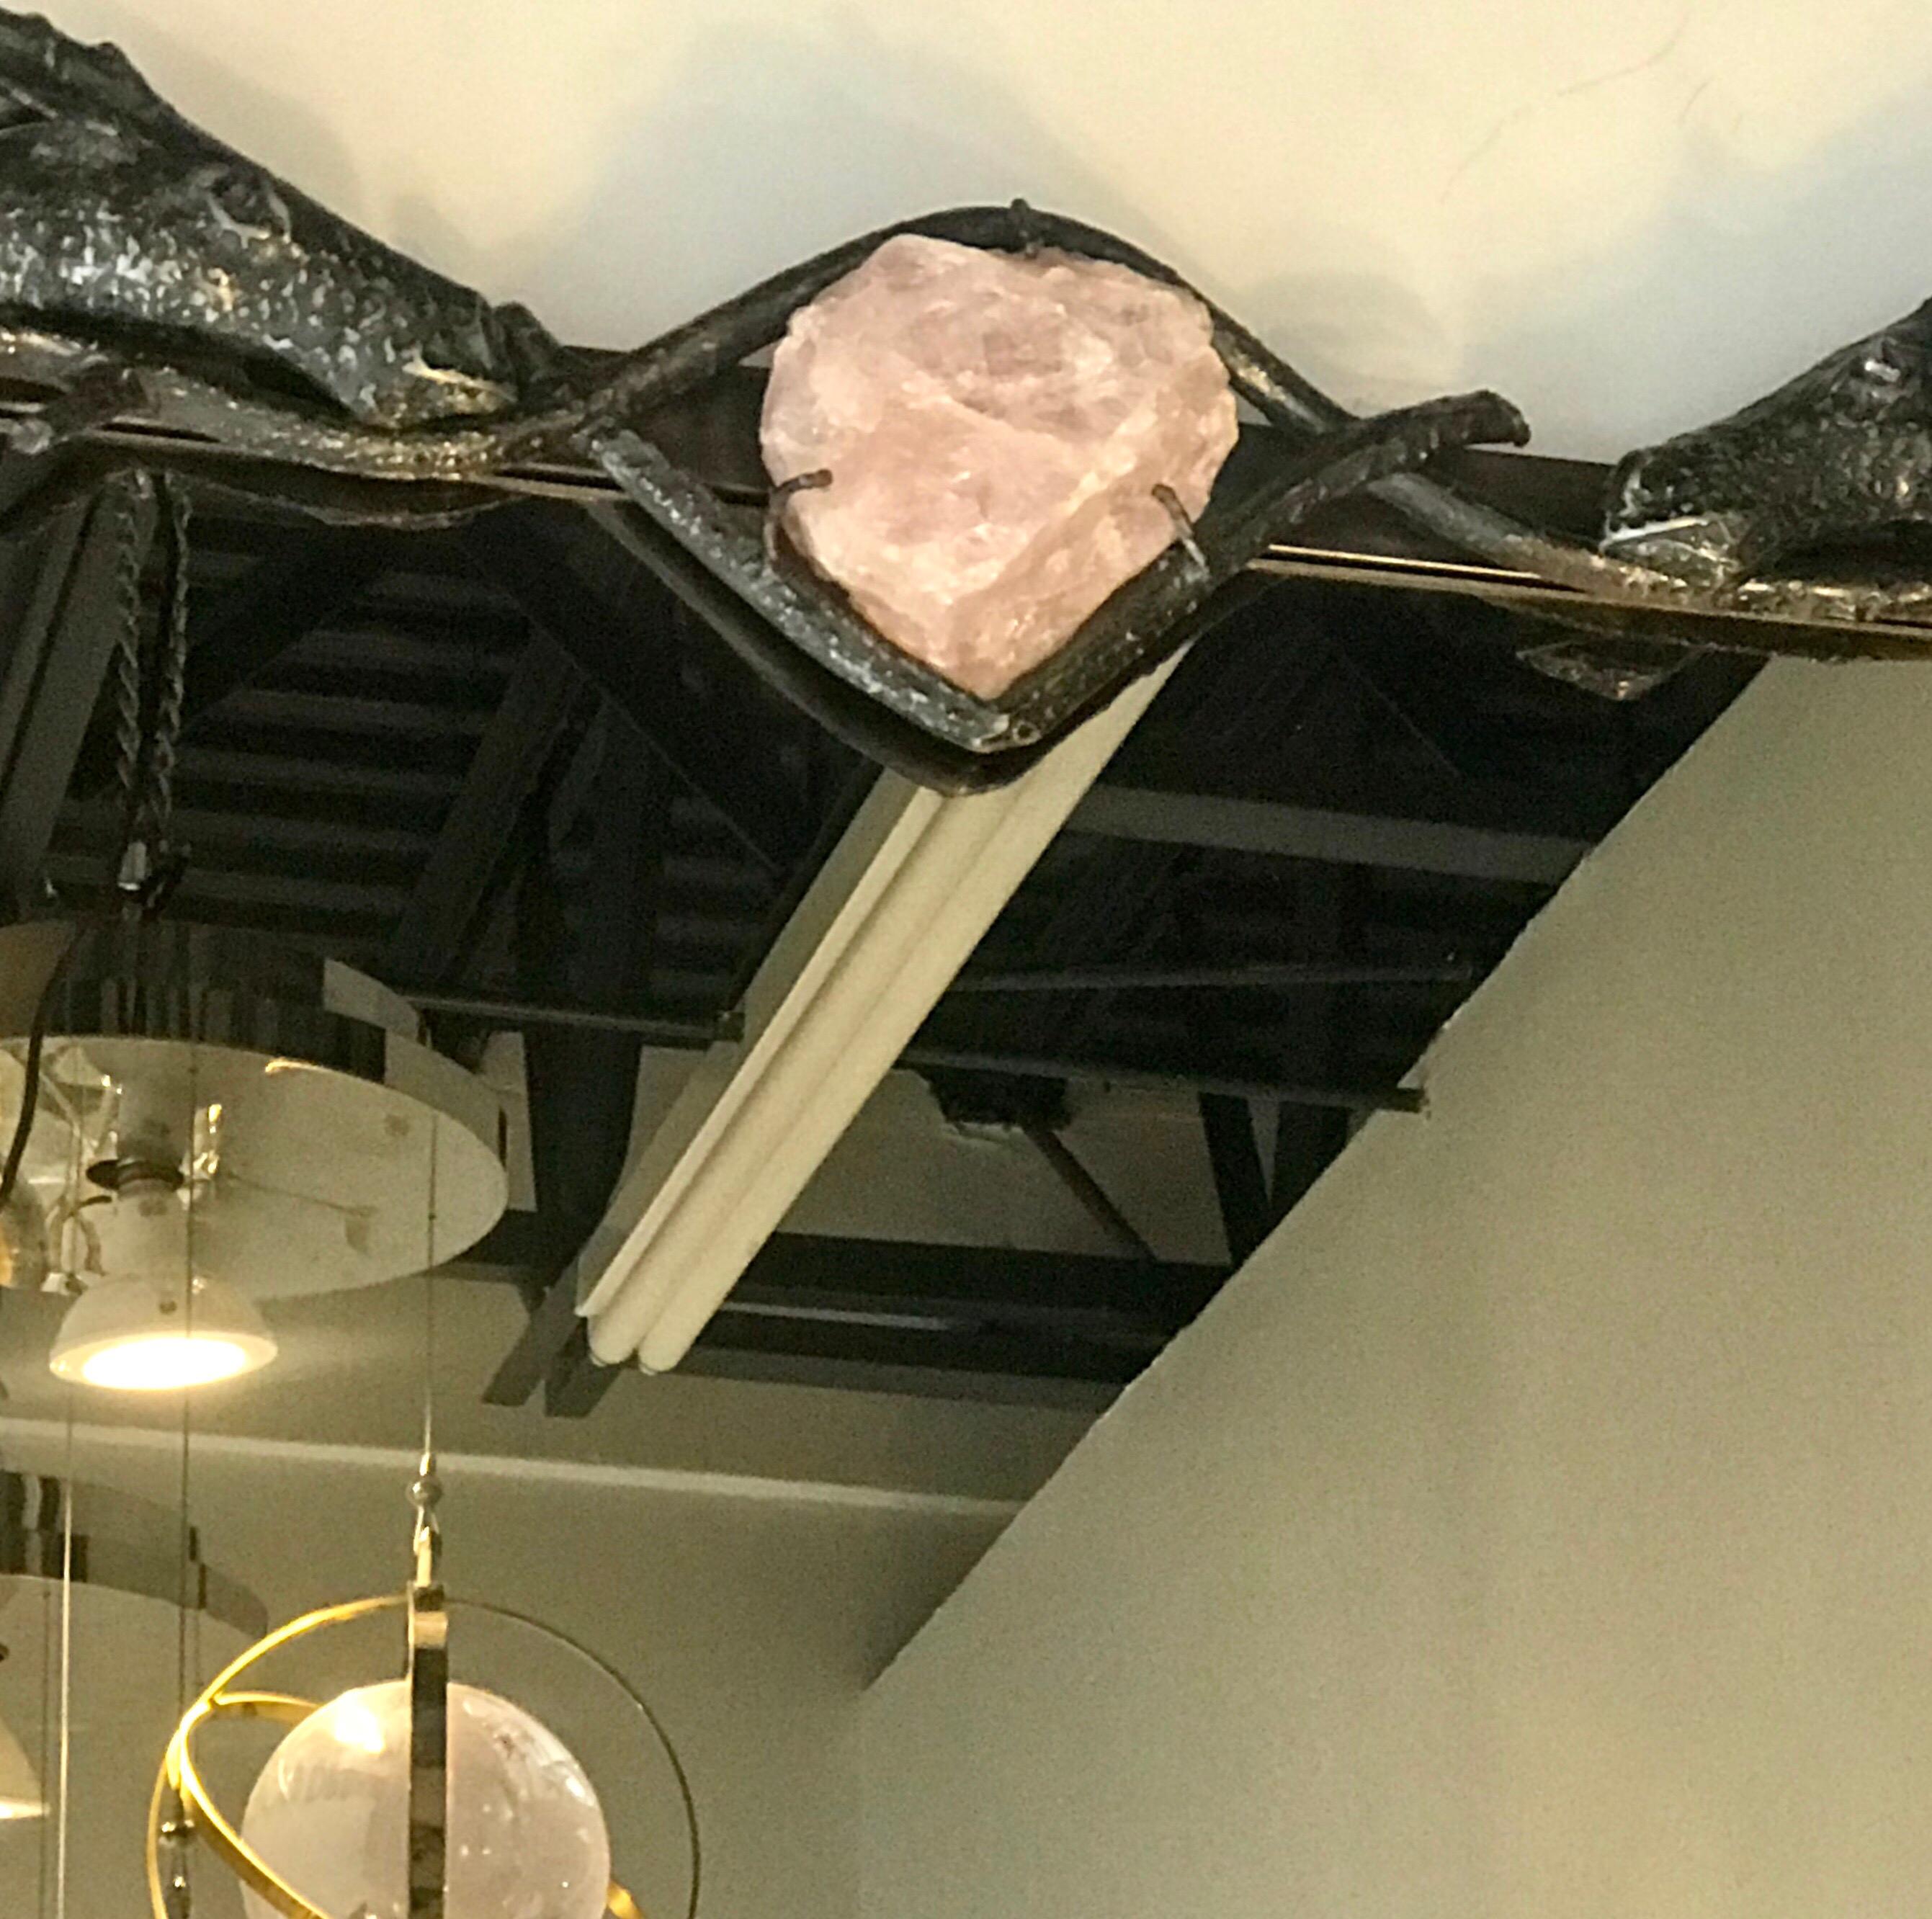 Midcentury Sculptural Mirror with Rose Quartz and Amethyst In Good Condition For Sale In Miami, FL